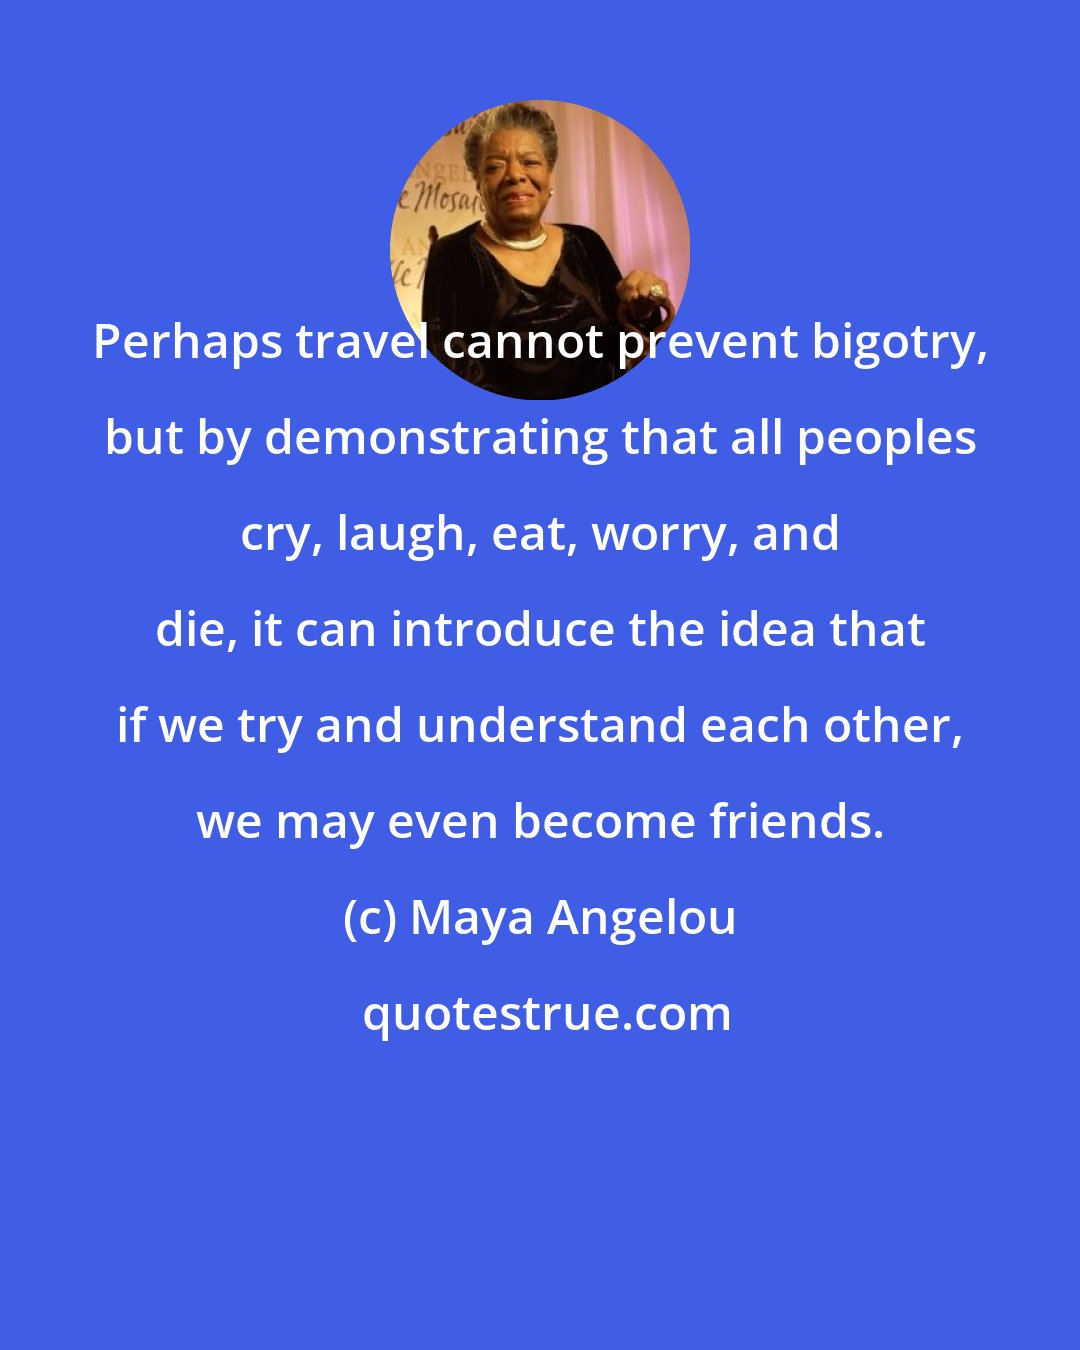 Maya Angelou: Perhaps travel cannot prevent bigotry, but by demonstrating that all peoples cry, laugh, eat, worry, and die, it can introduce the idea that if we try and understand each other, we may even become friends.